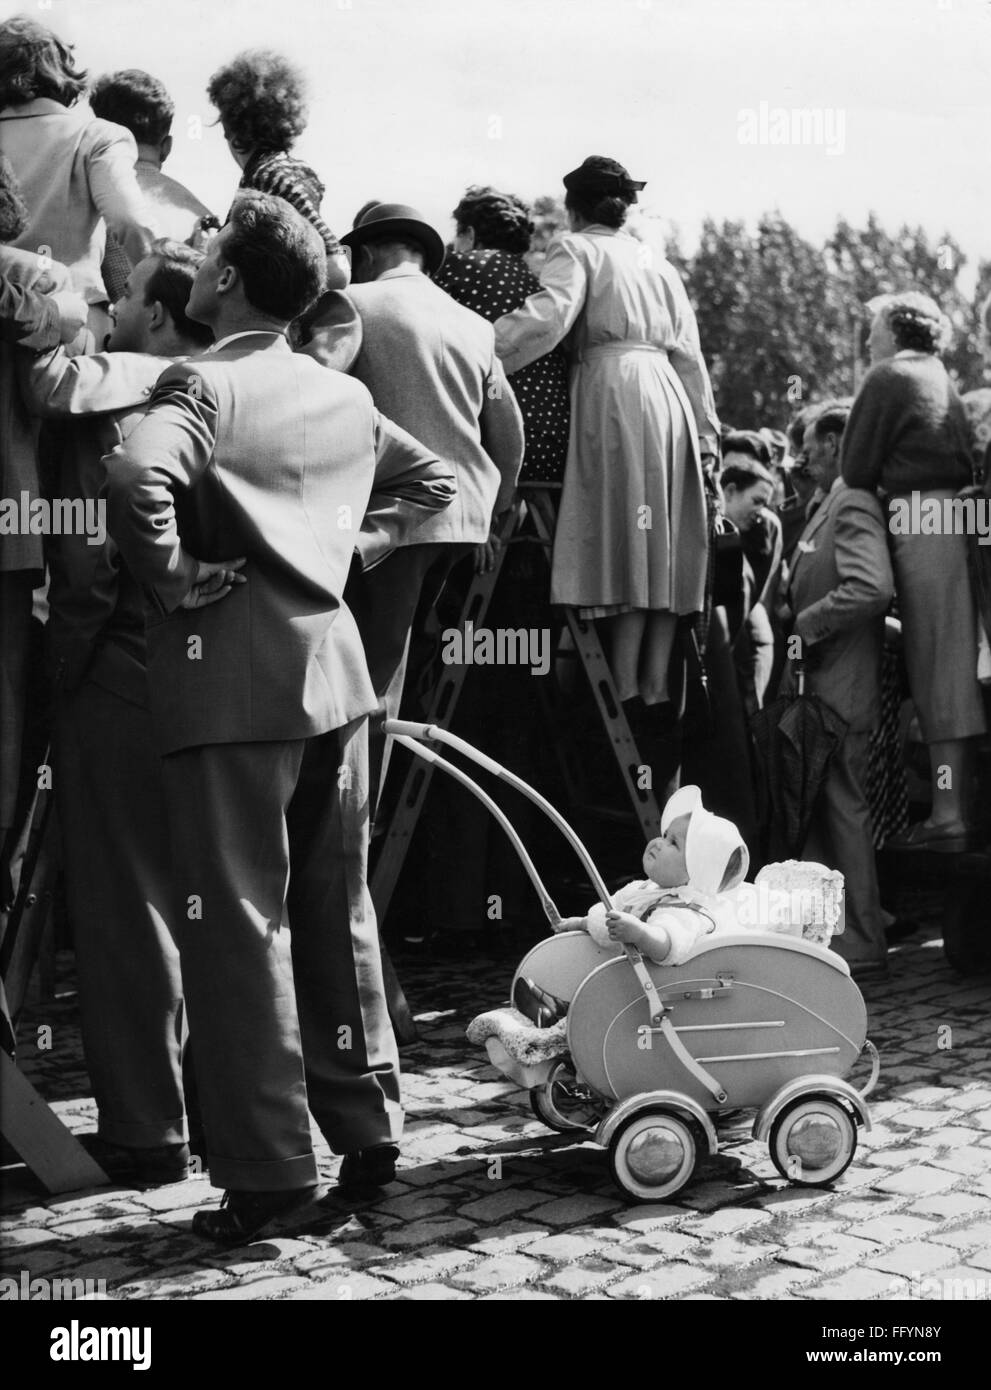 people, children, babies, baby in pram amongst viewers of a public event, 1961, Additional-Rights-Clearences-Not Available Stock Photo